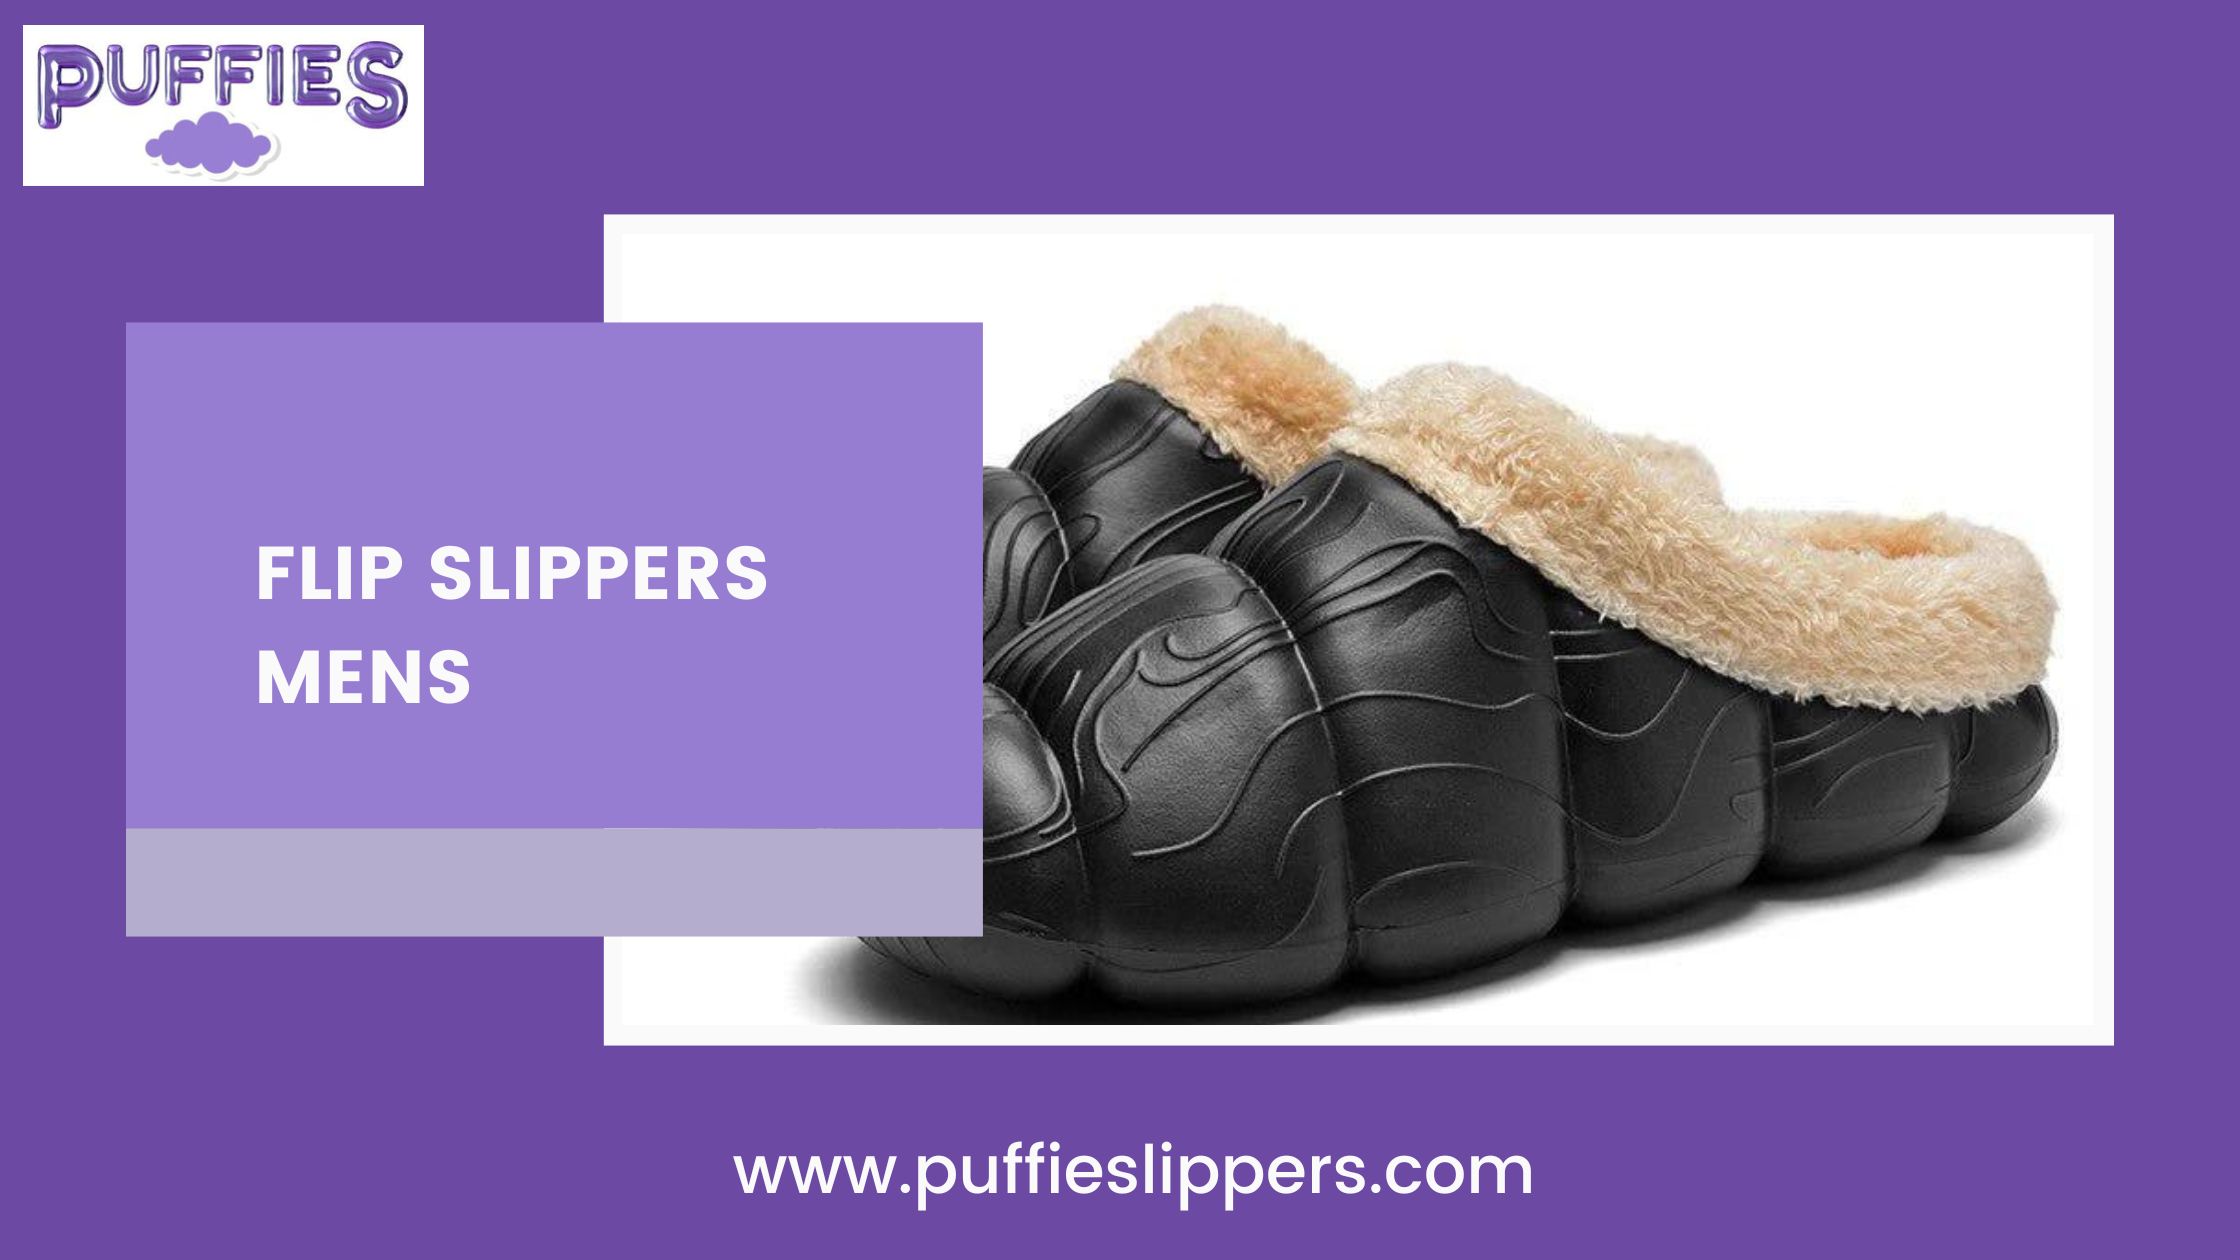 Step into Comfort and Style with Puffie Slippers' Men's Flip Slippers - Inside The Nation